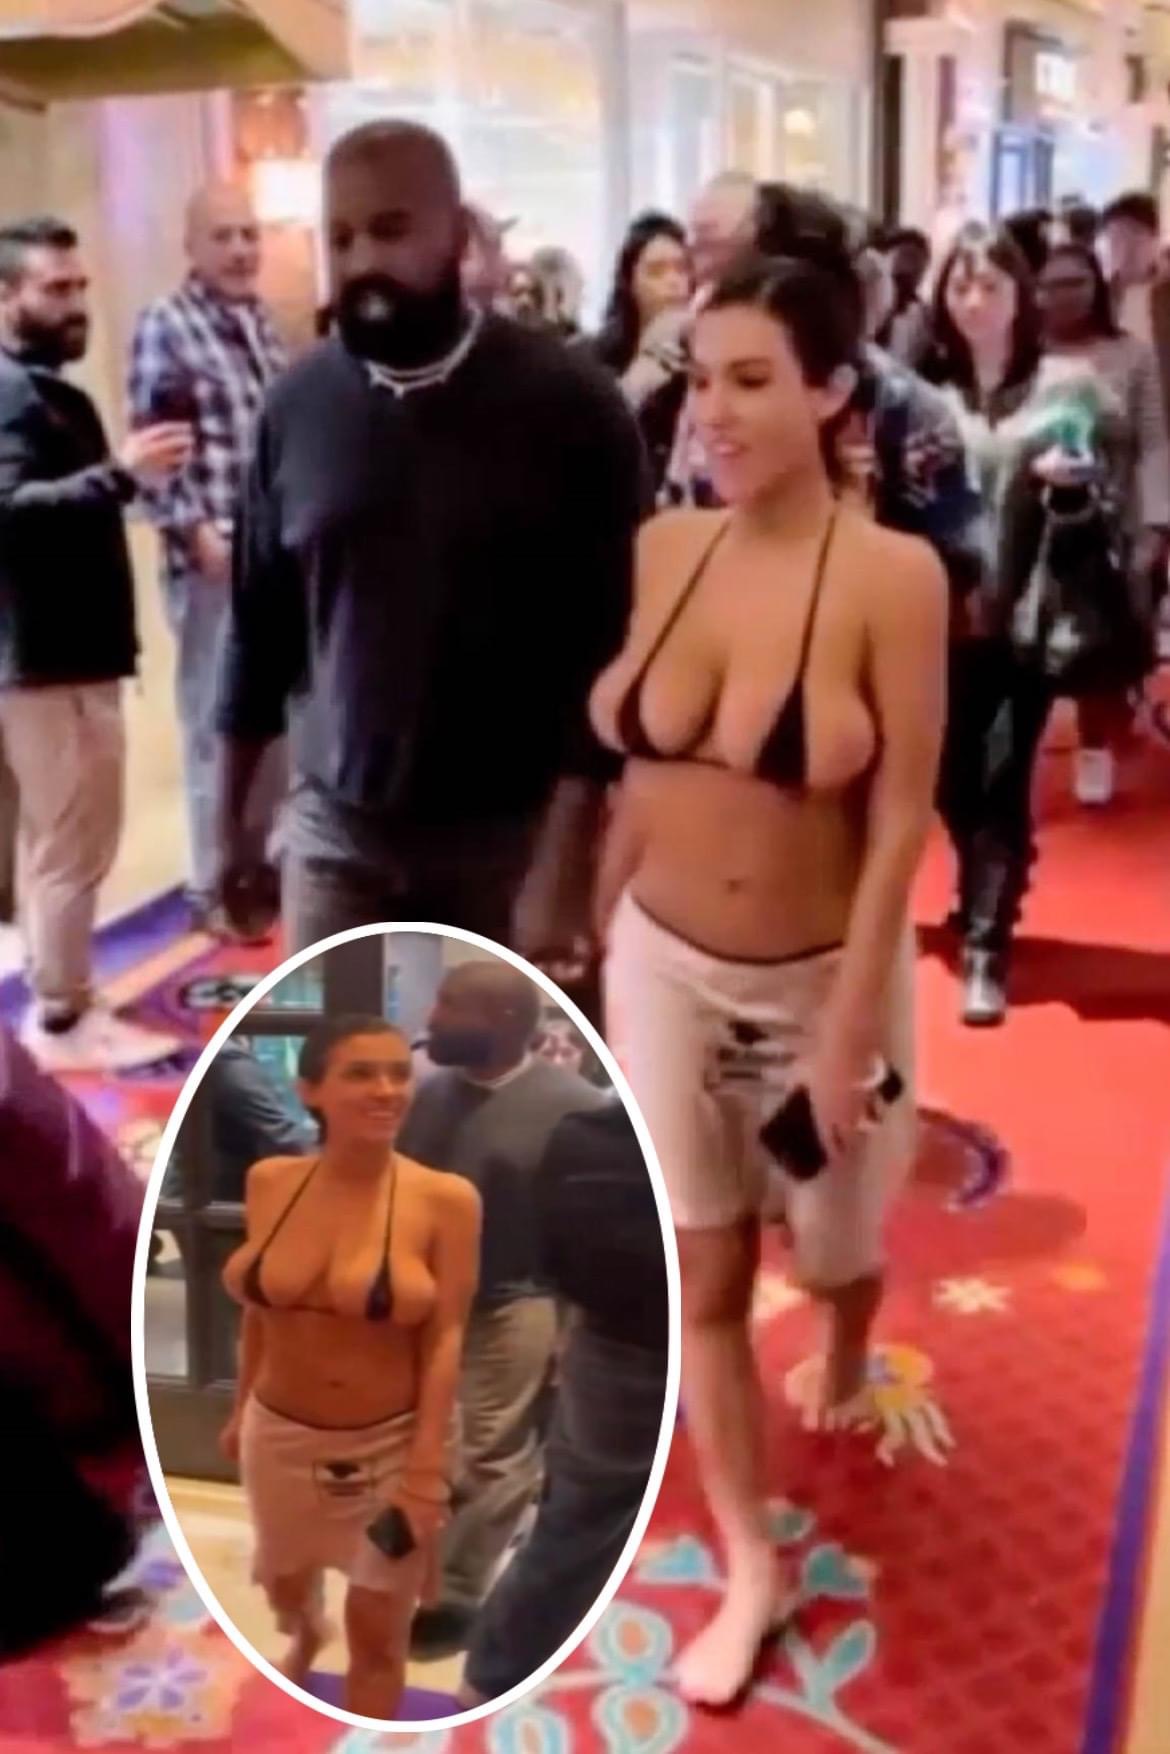 Kanye West blasted for ‘humiliating’ detail in viral video with Bianca Censori